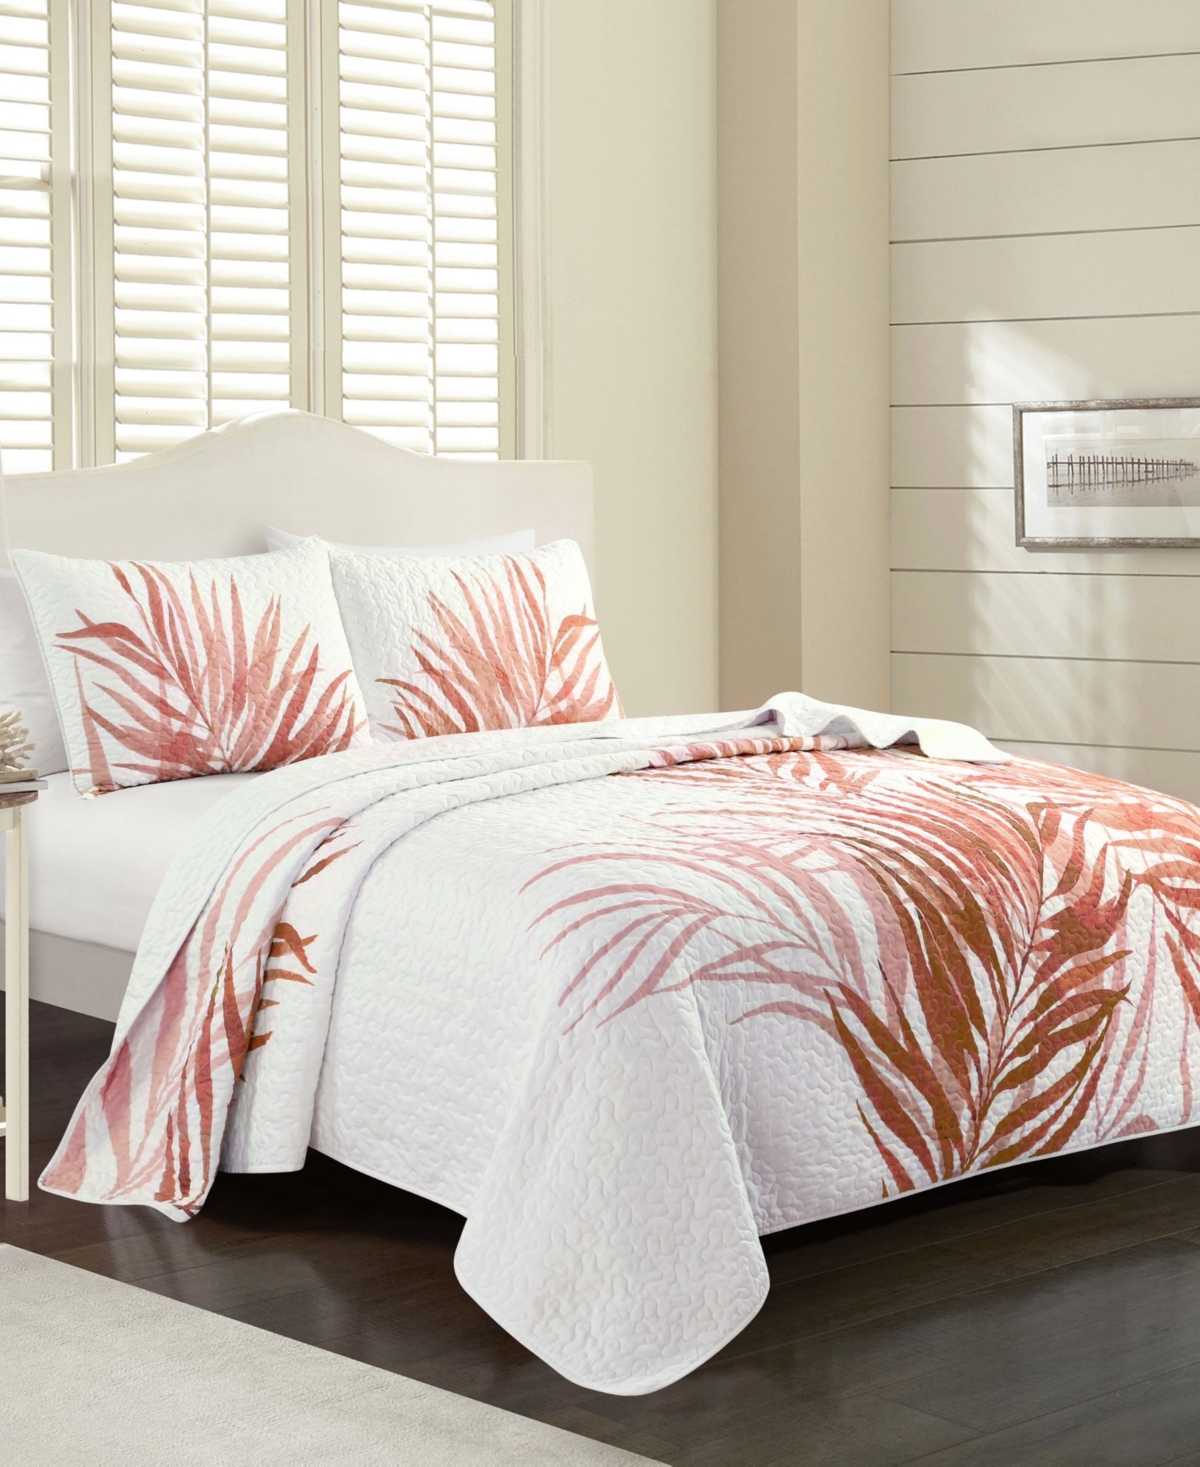 Elise And James Home Palm Leaf Tropical Jungle 3-piece Quilt Set, Queen In Coral